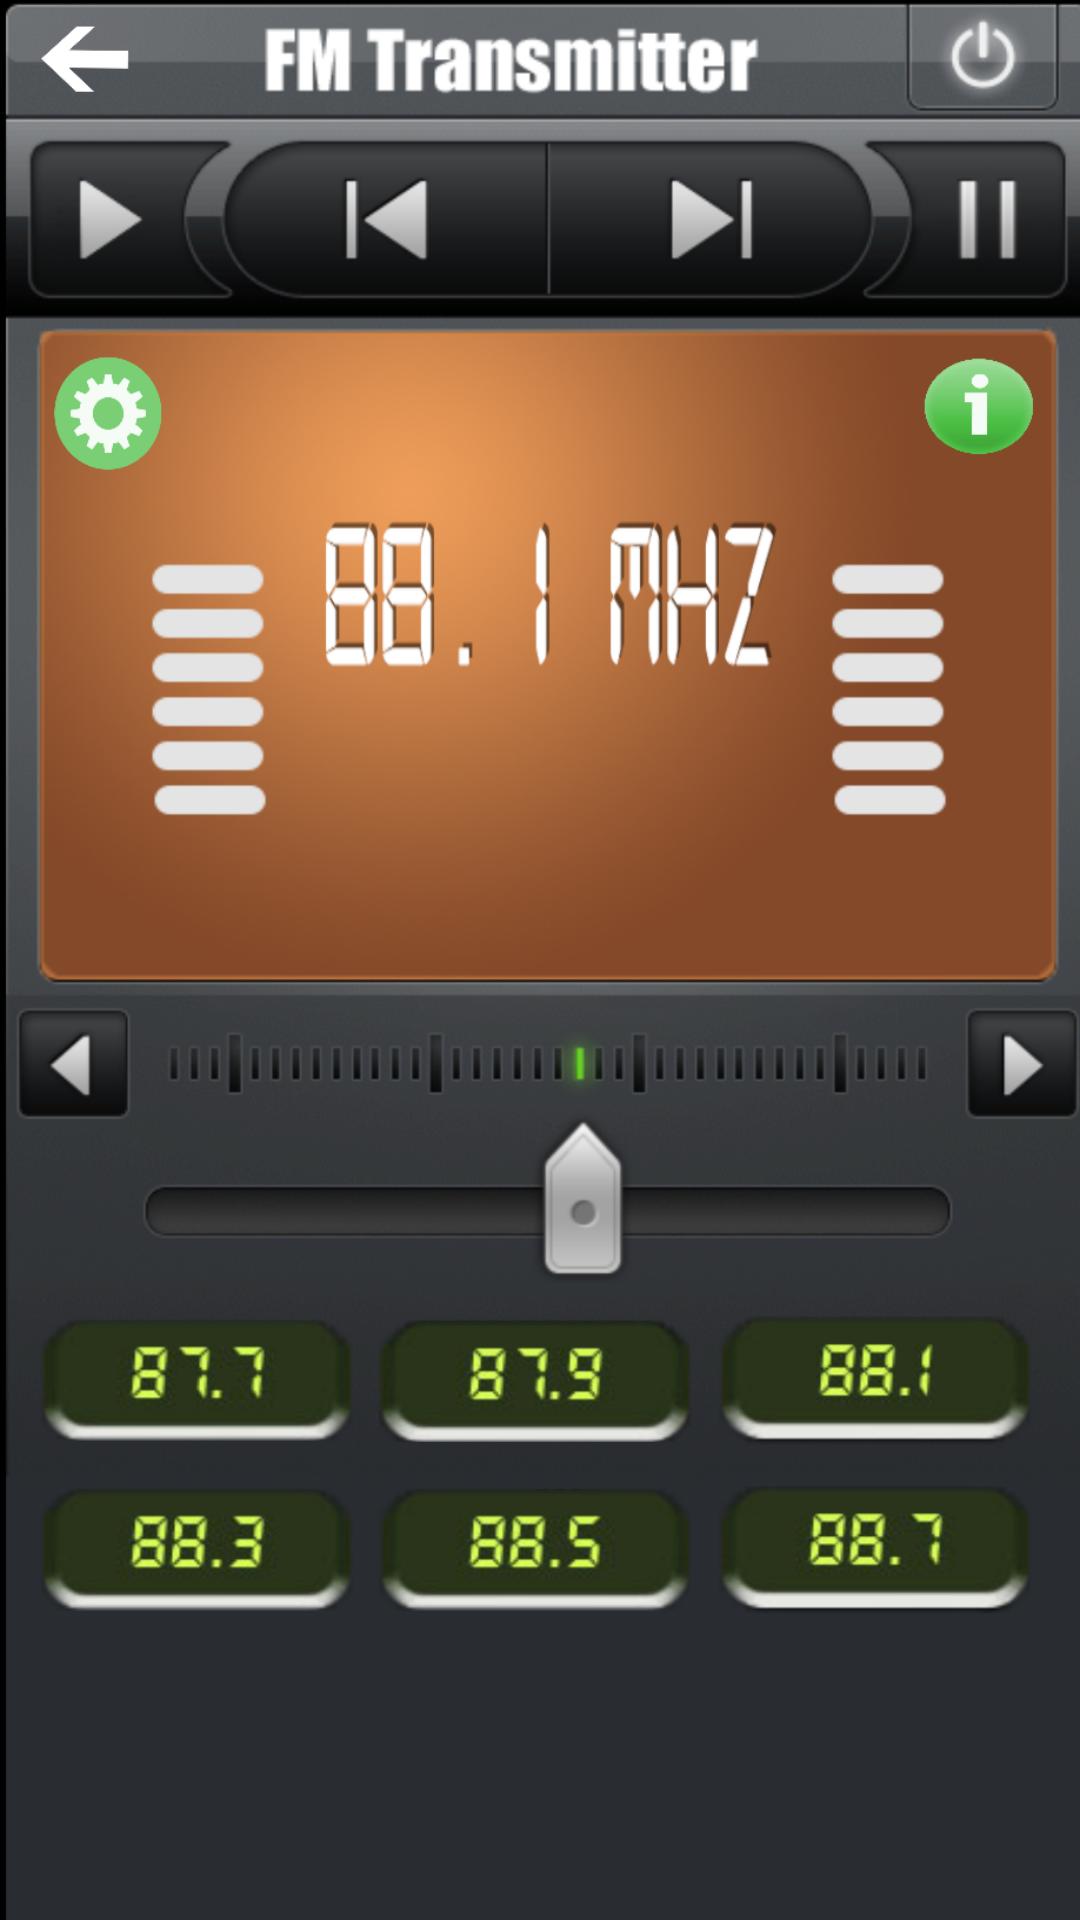 FM Transmitter New 2017 for Android - APK Download